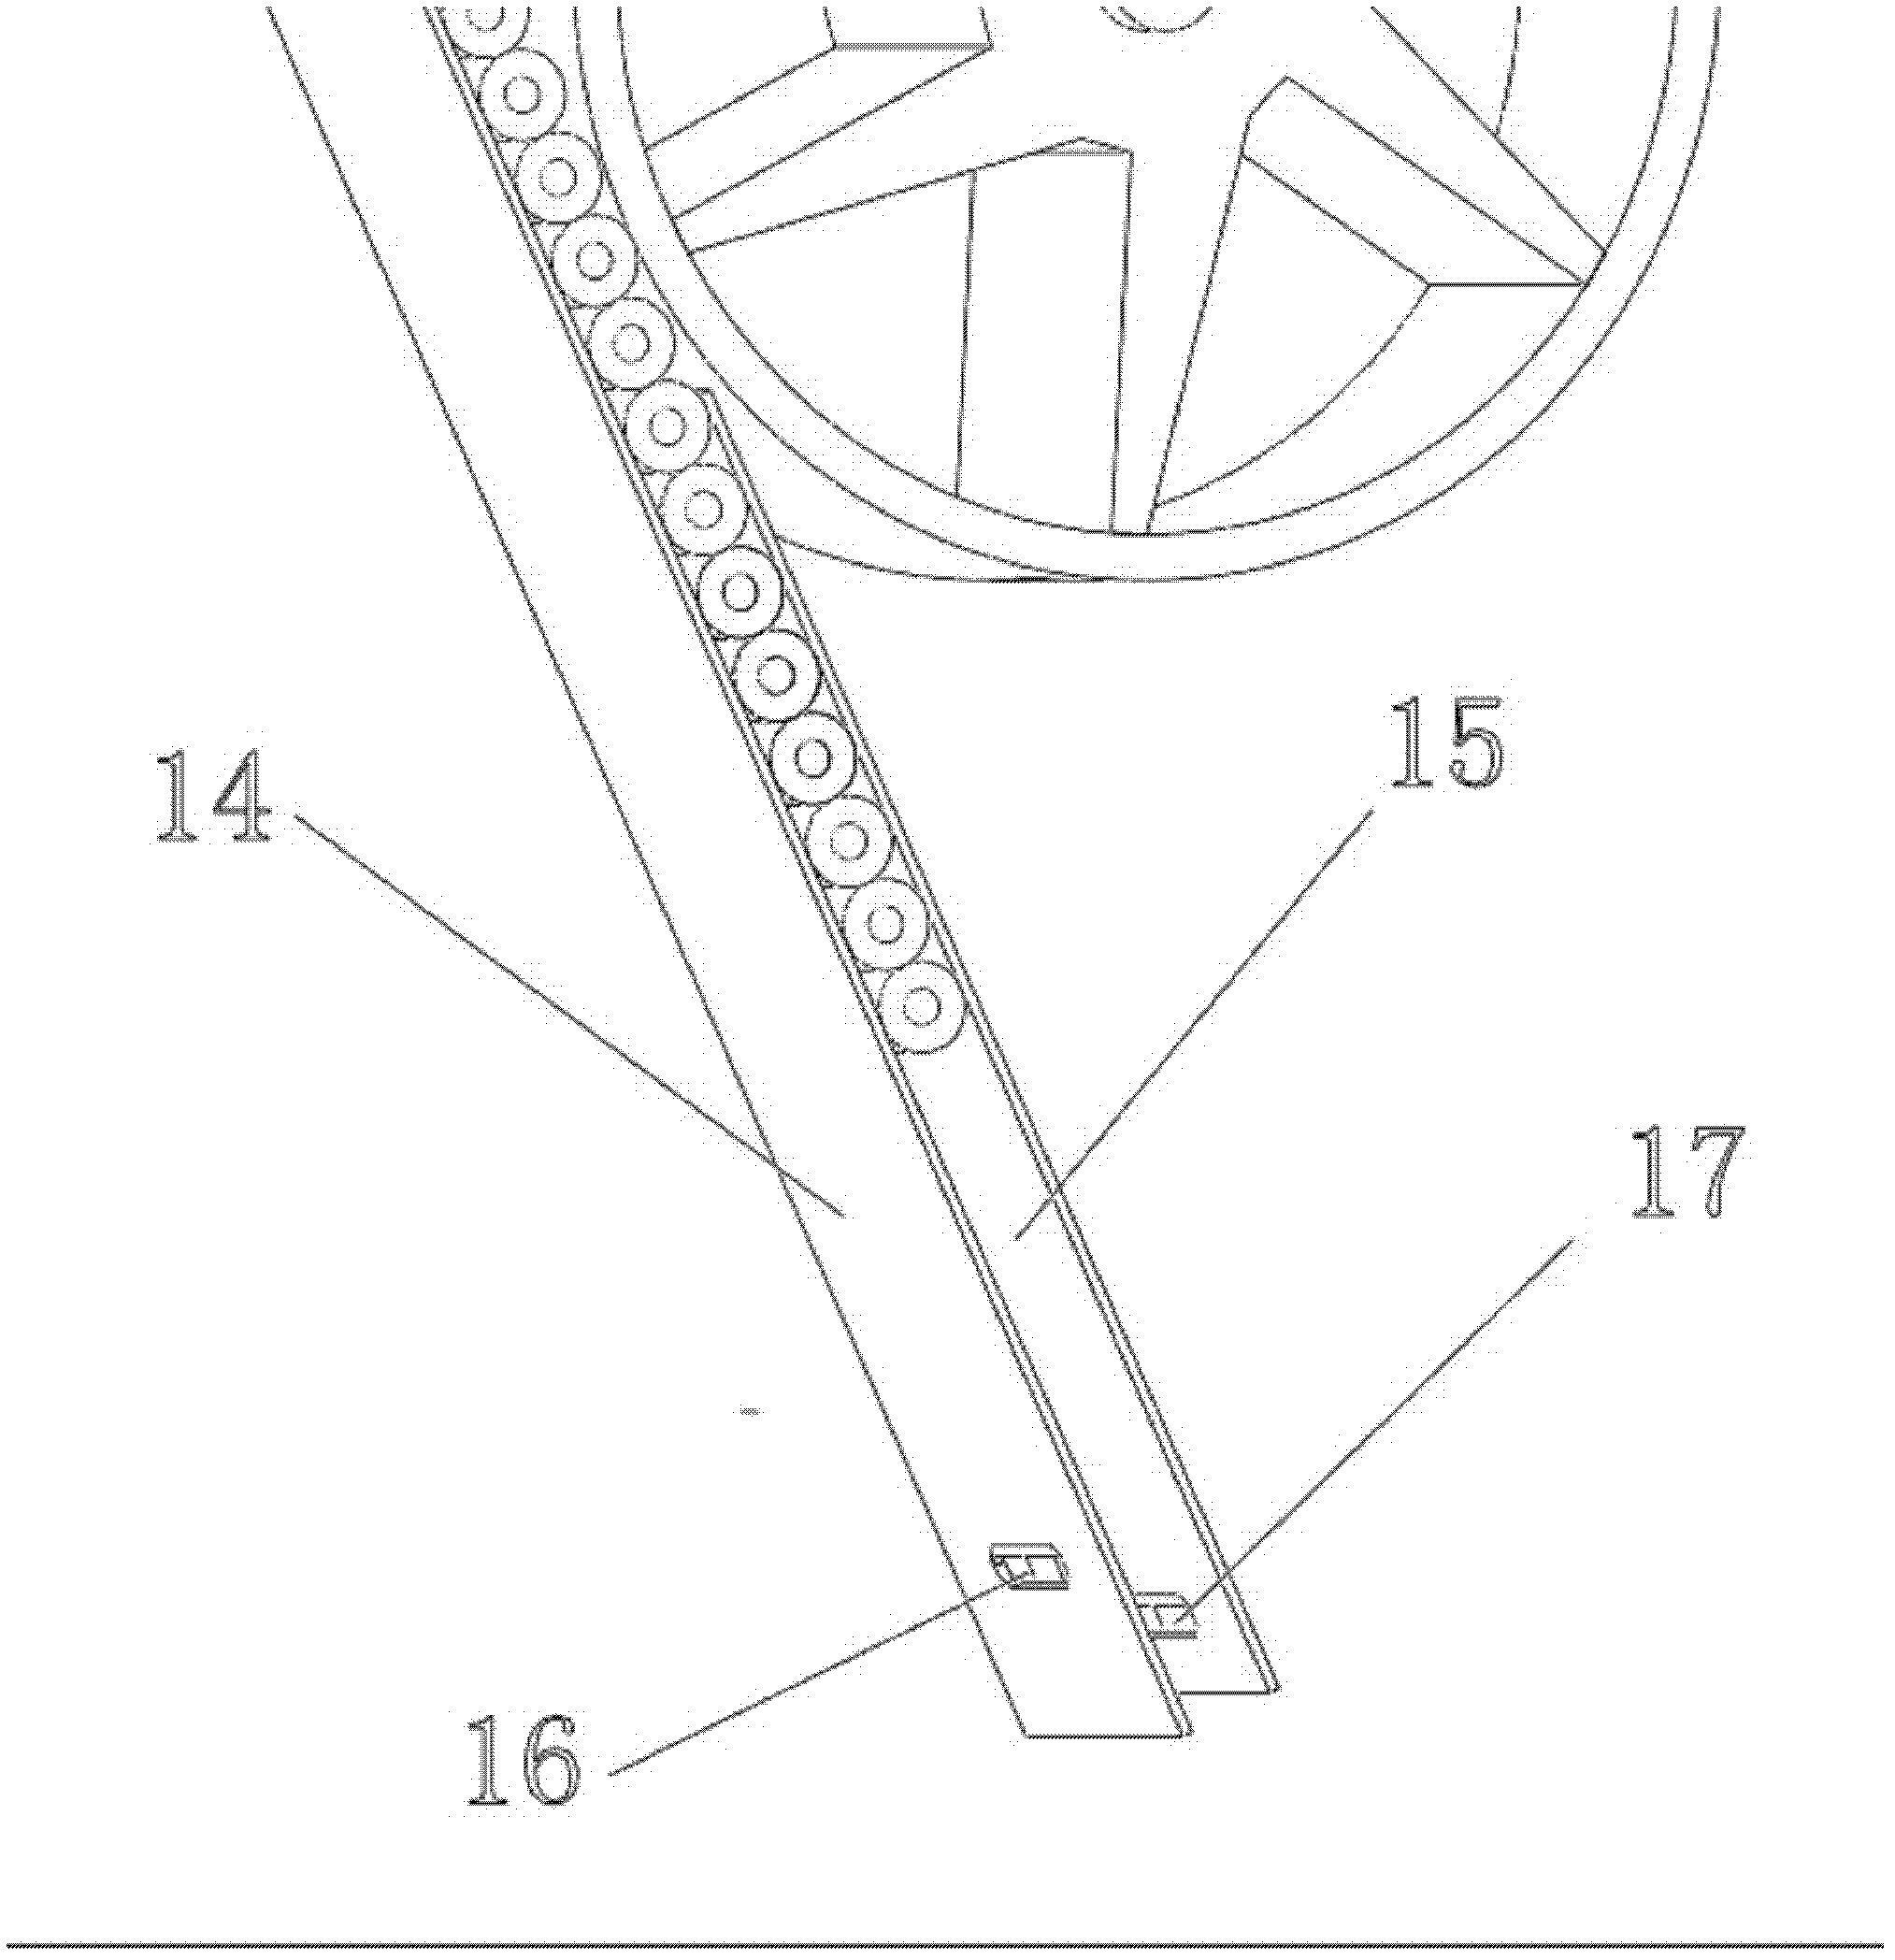 Electrically-controlled firework discharging box